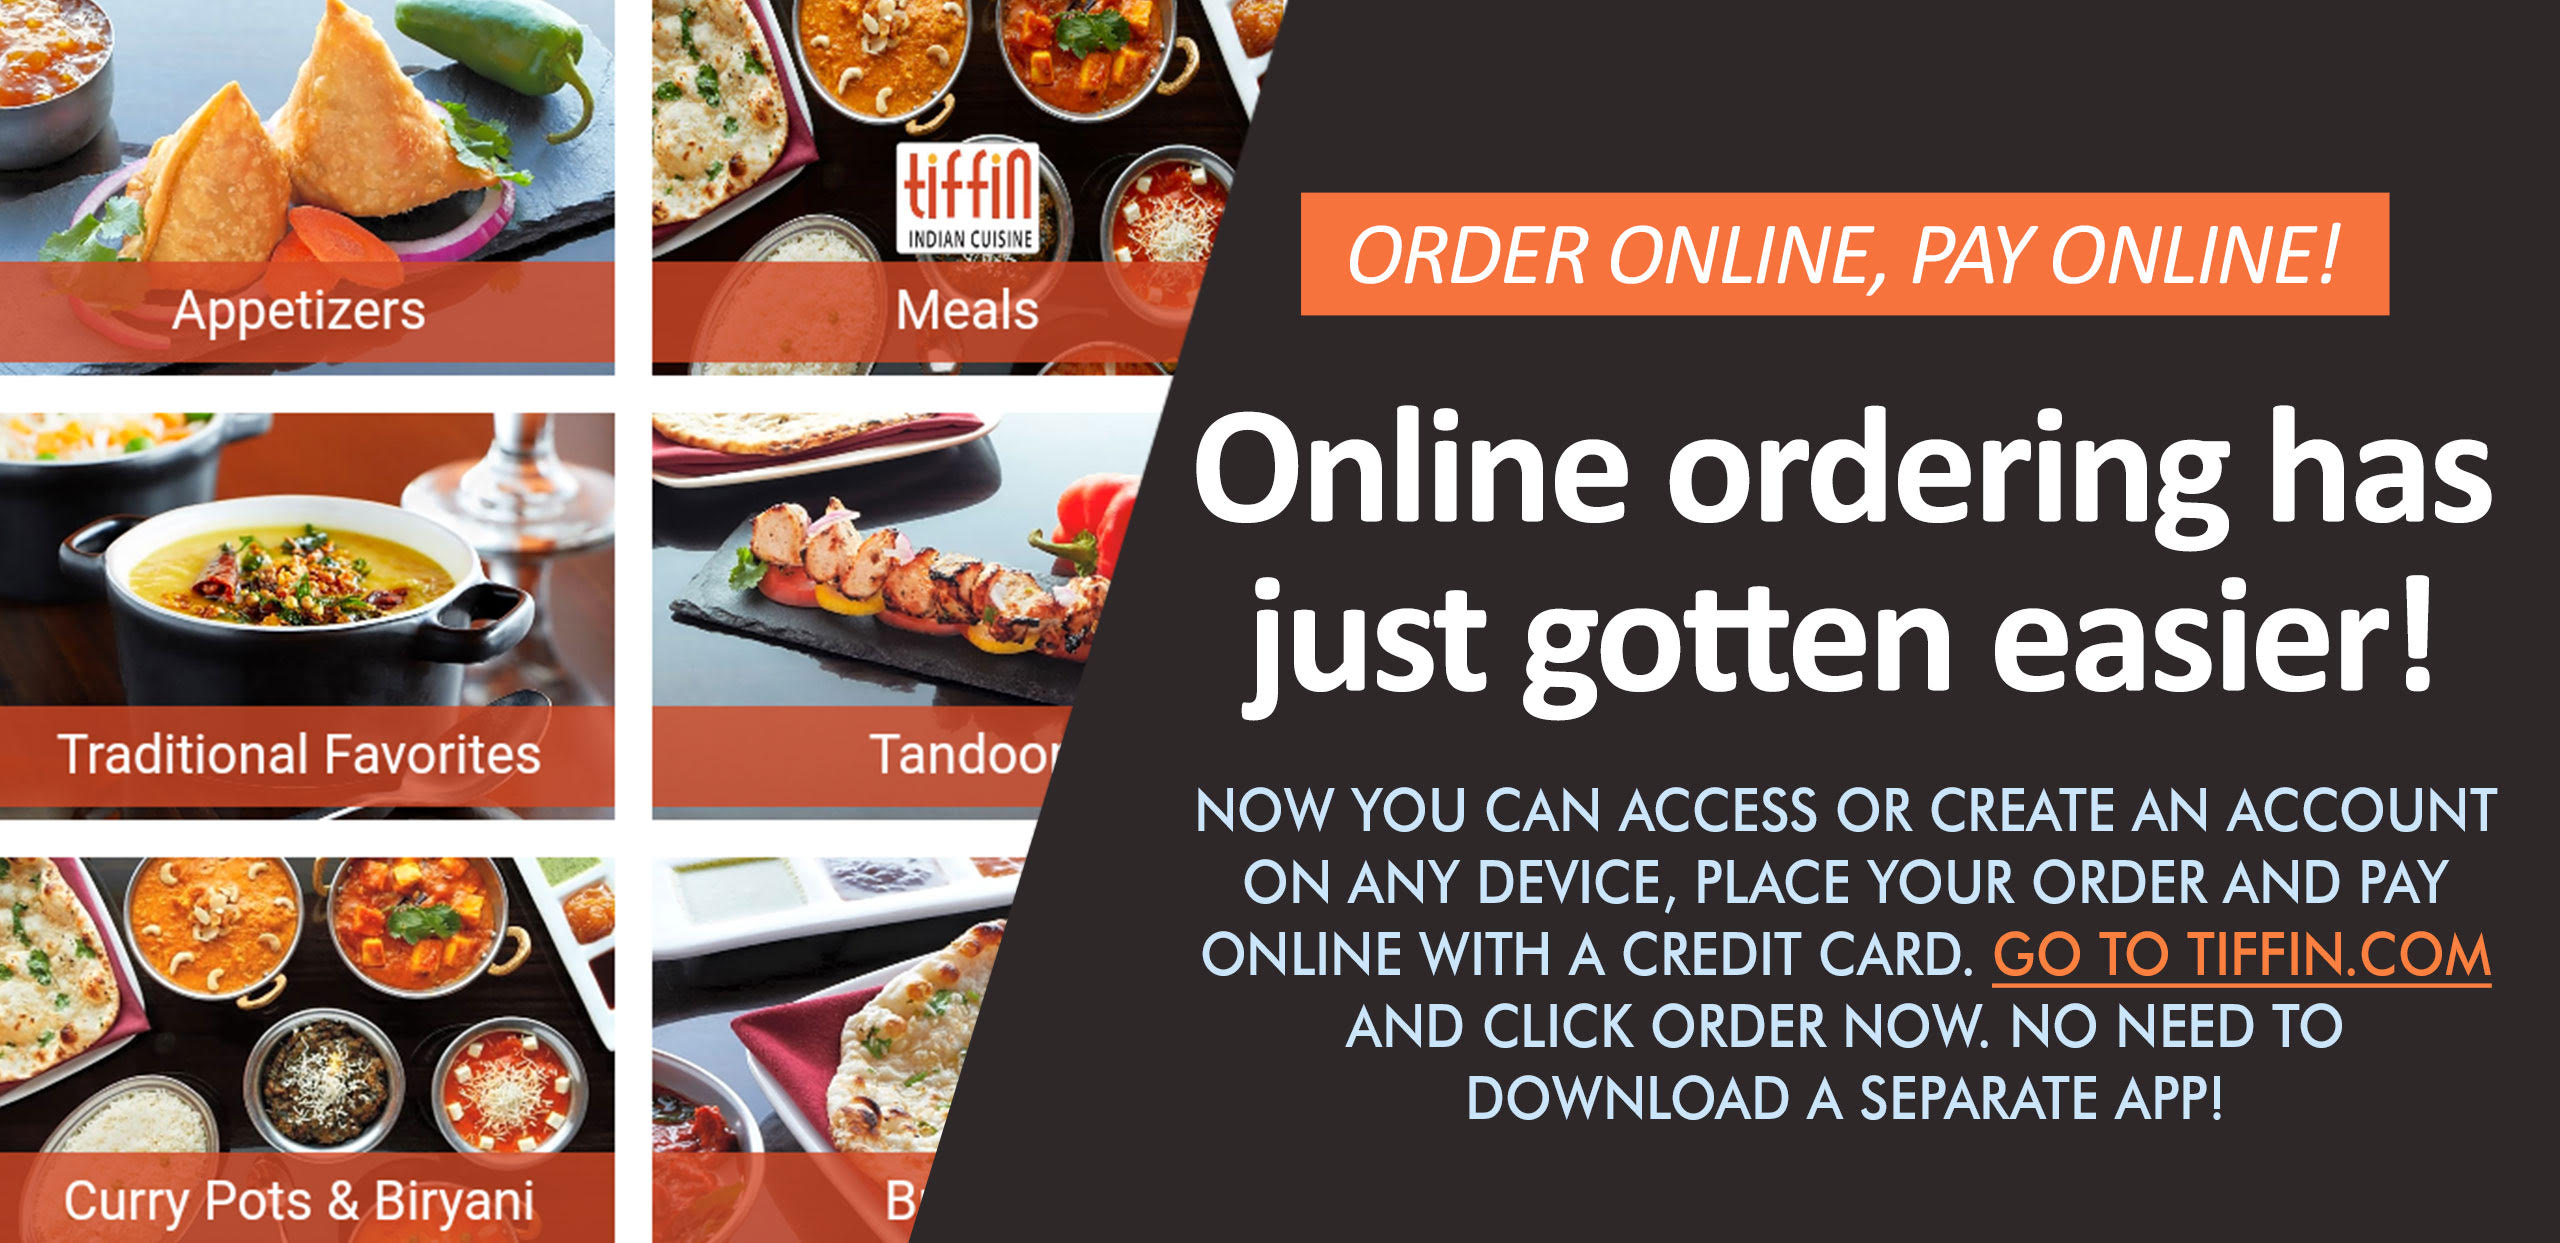 Order and pay online